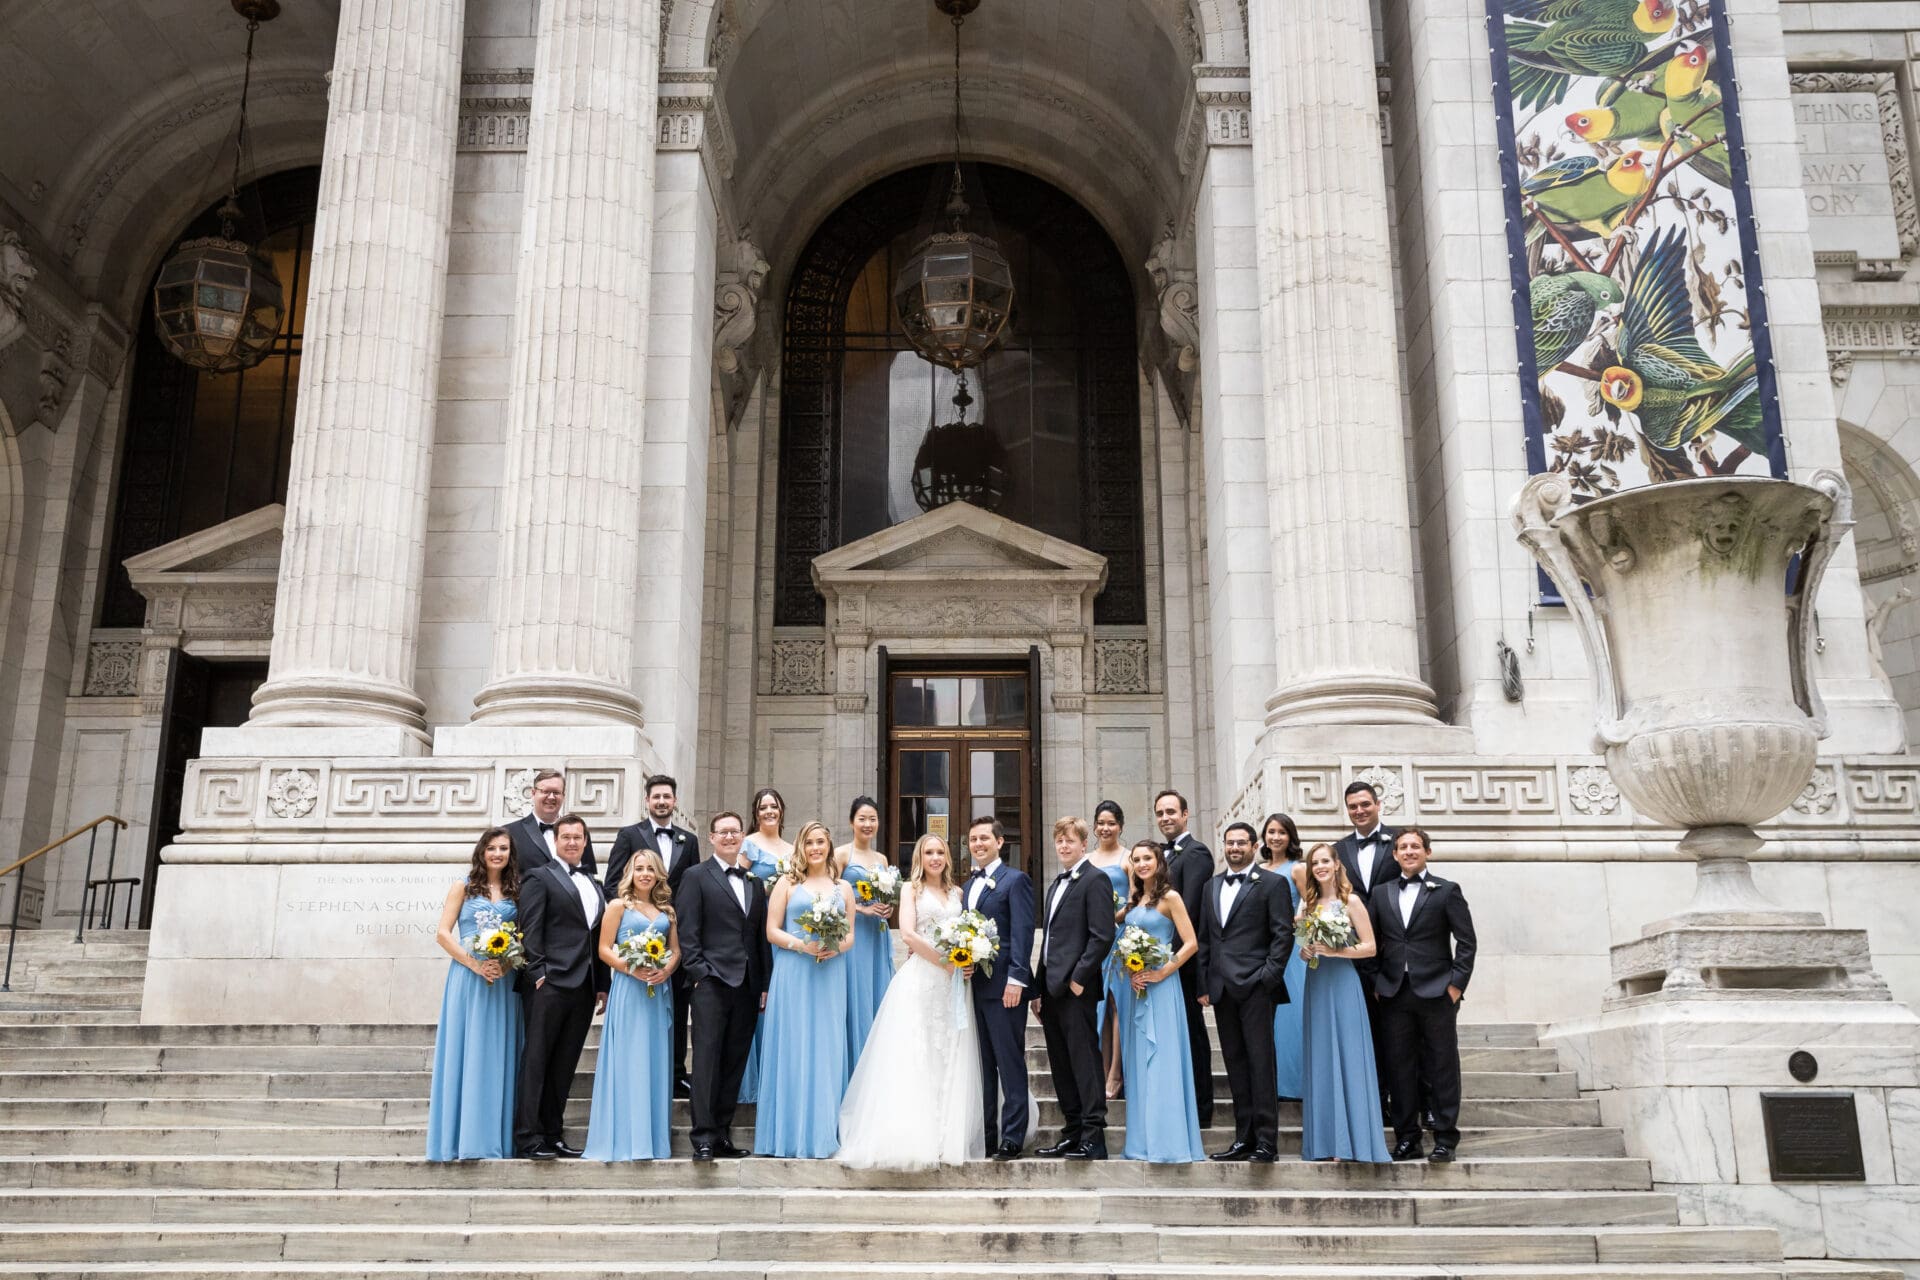 A wedding party poses on the steps of the New York Public Library during a photo session